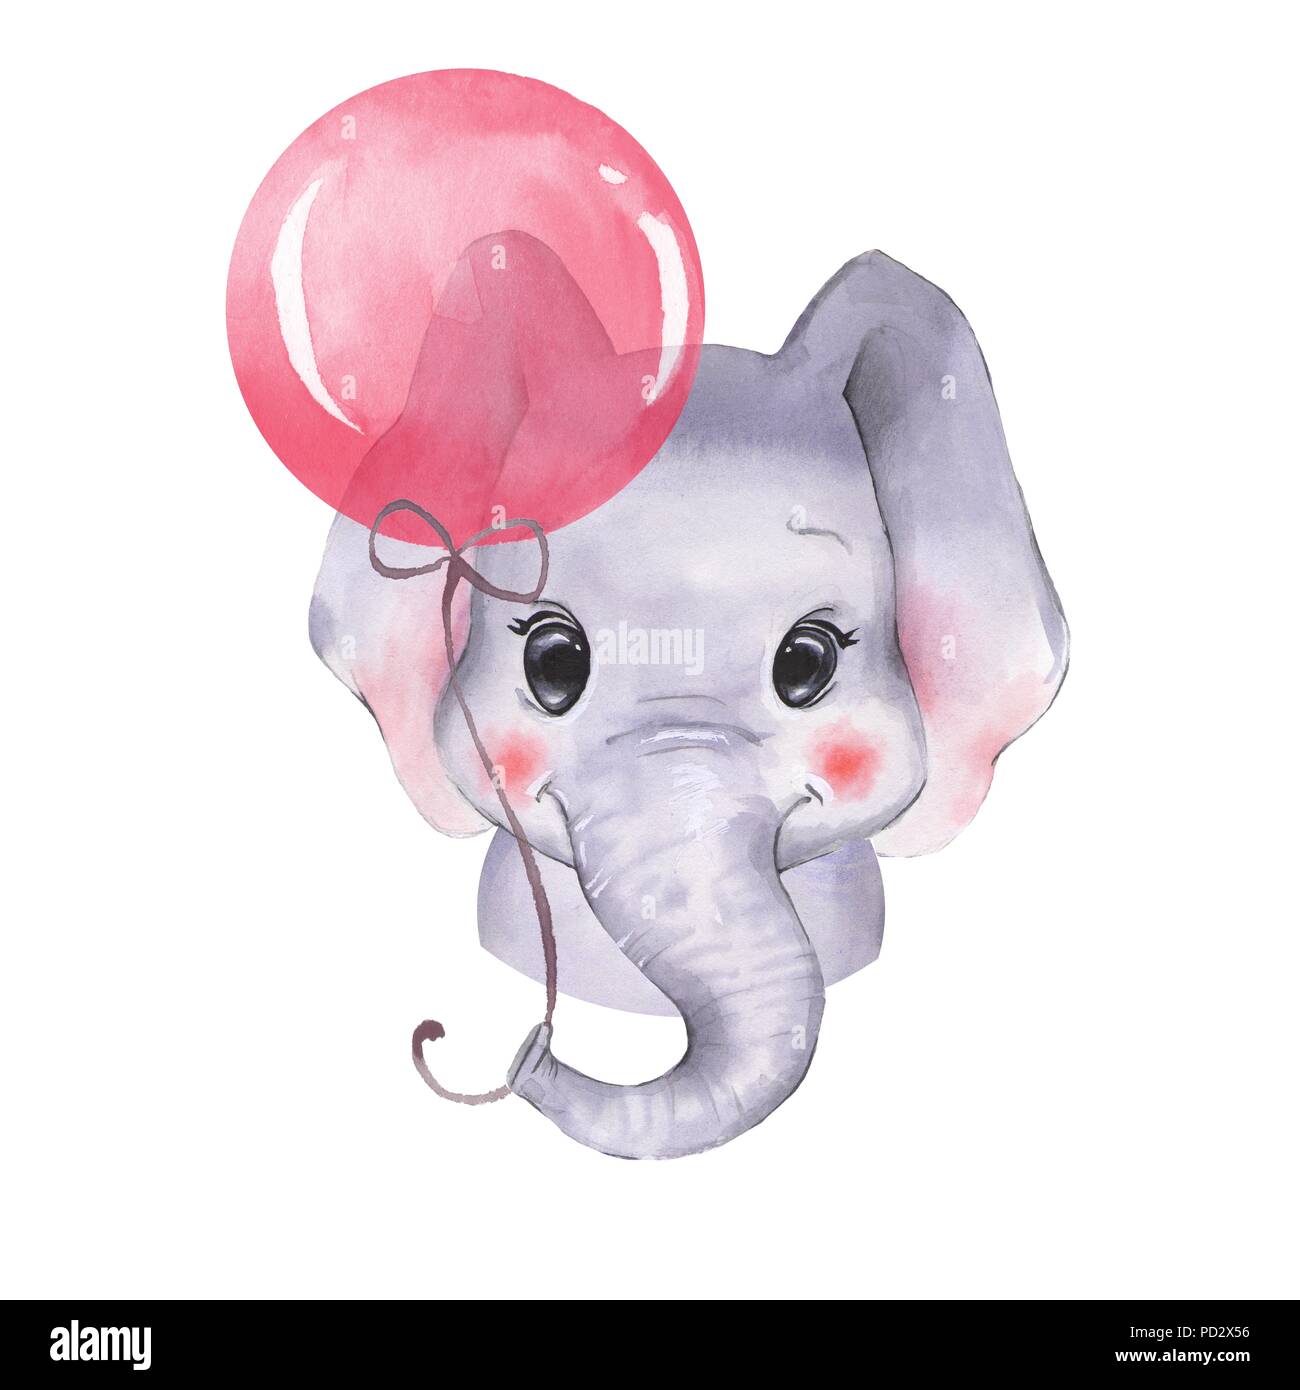 Watercolor elephant with balloon. Cute cartoon illustration, isolated on white background Stock Photo